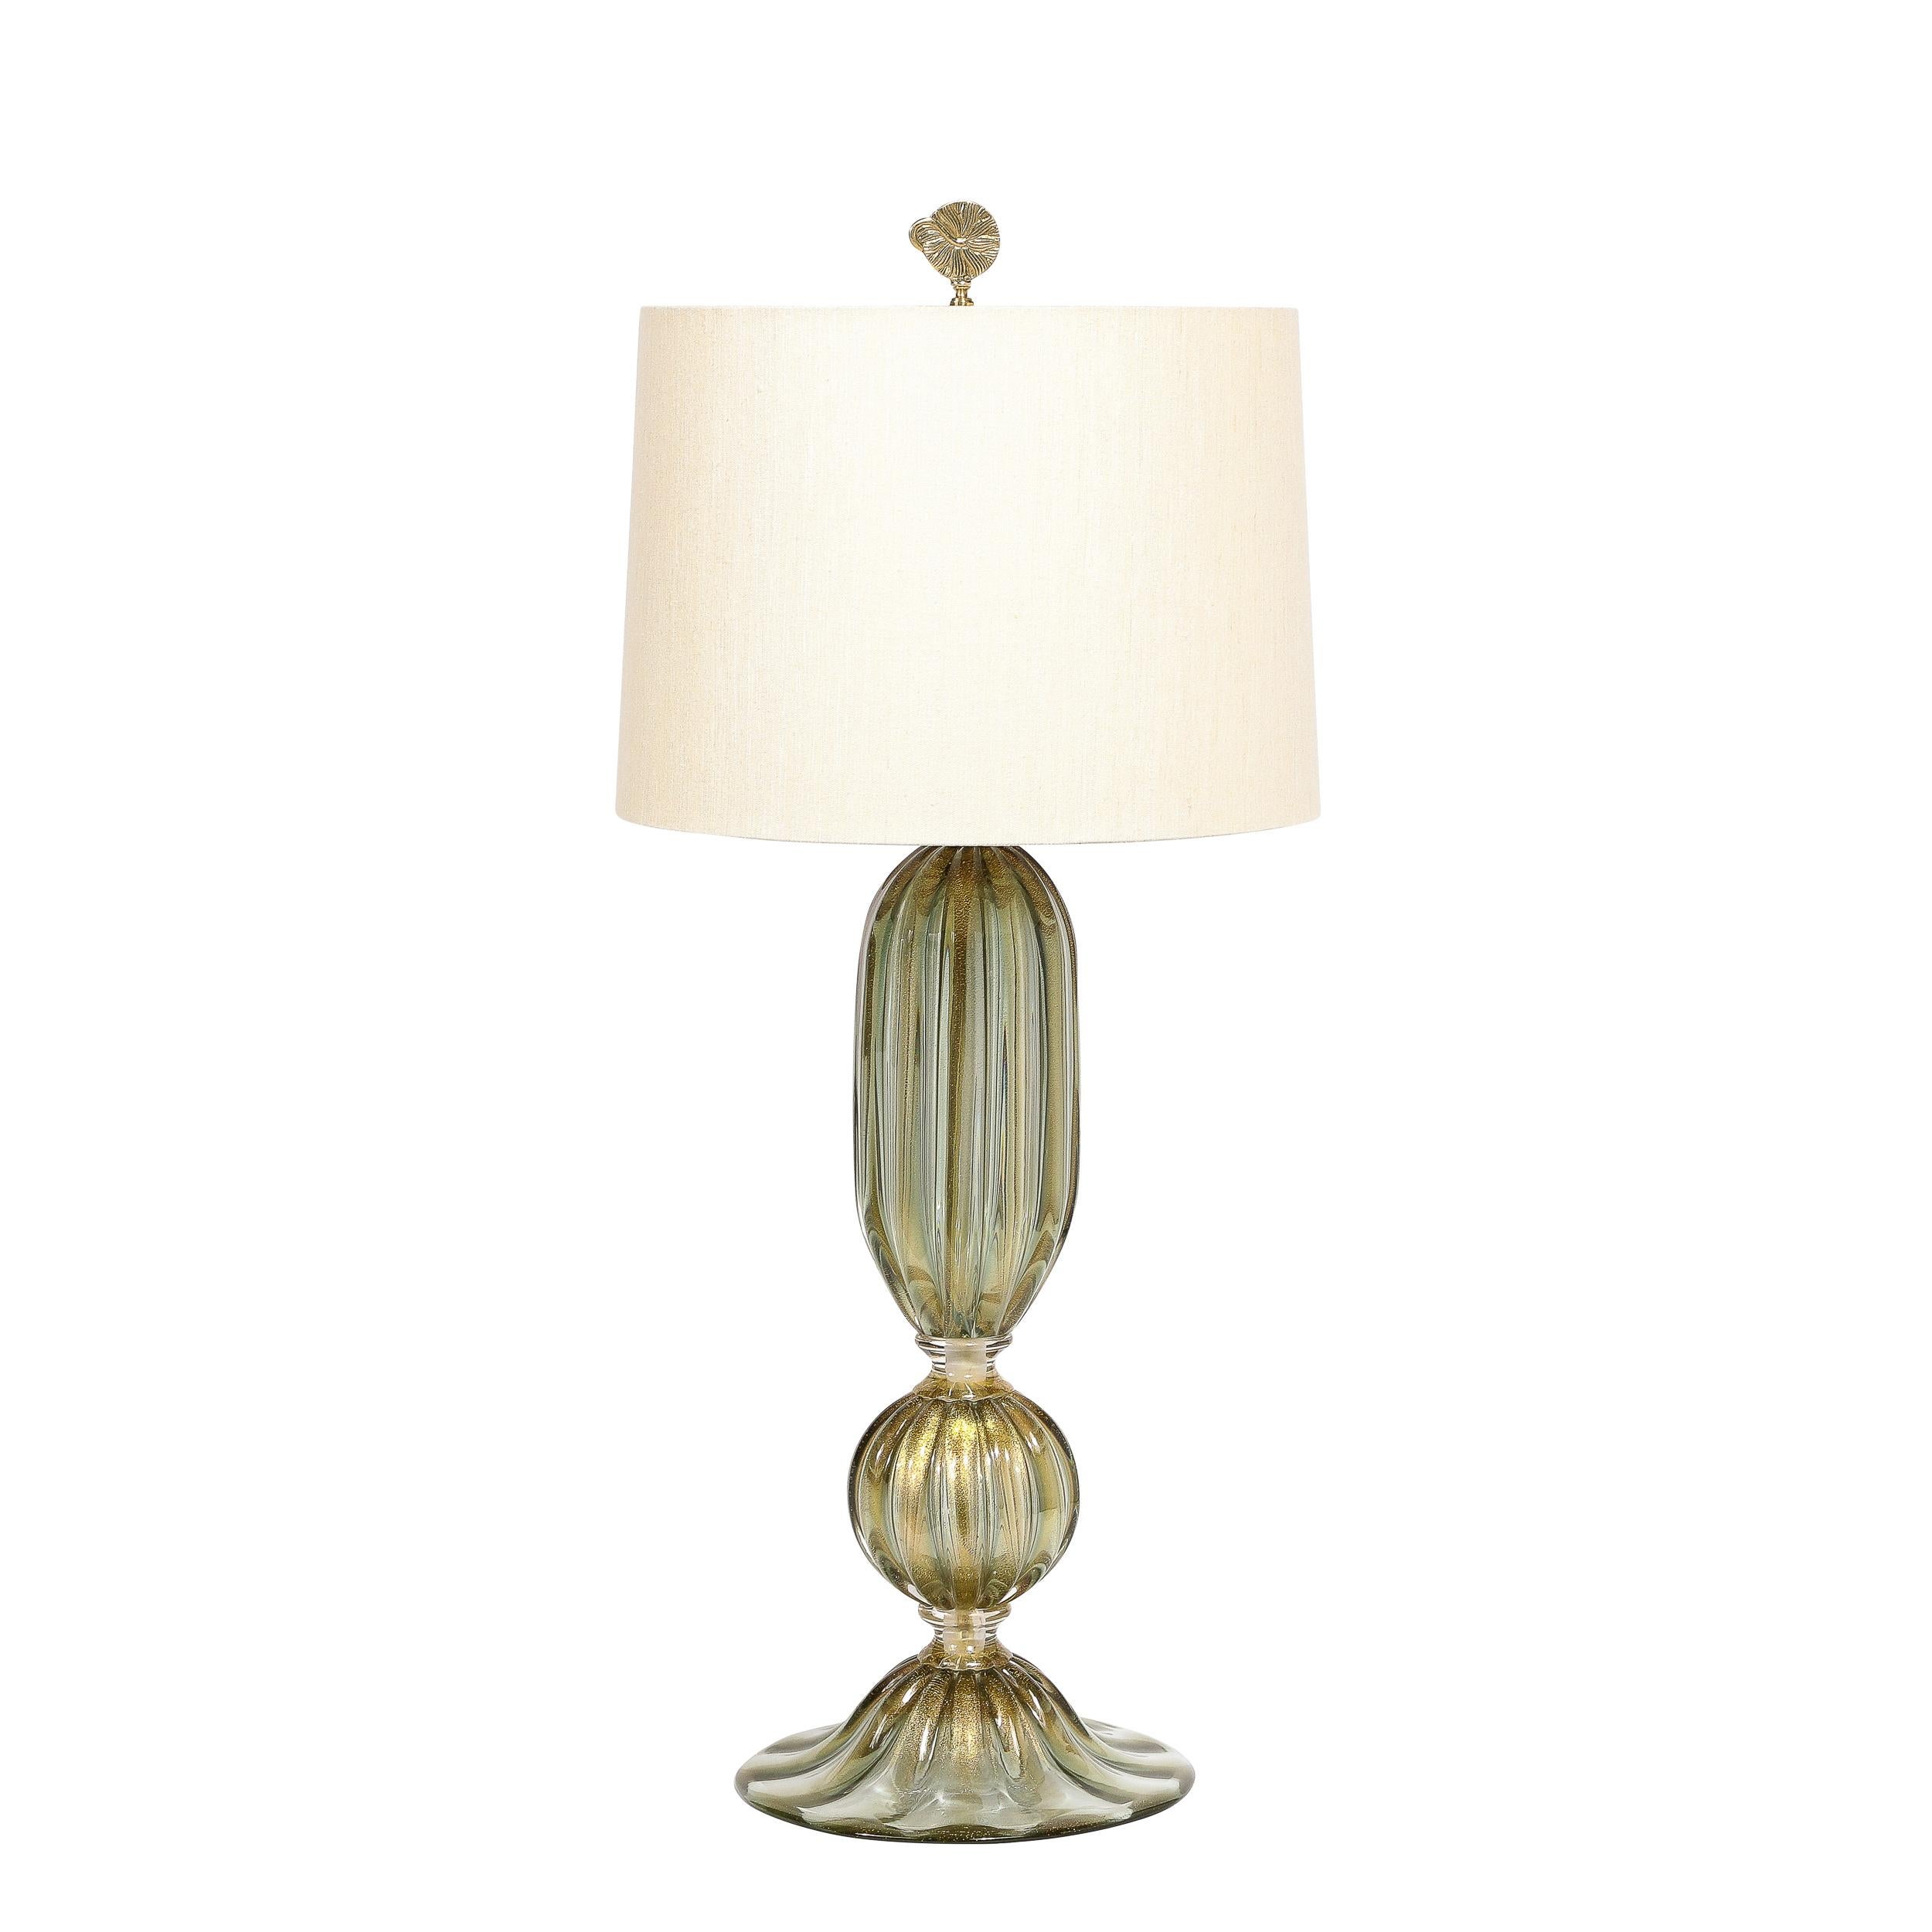 This stunning pair of table lamps were handblown in Murano, Italy- the island off the coast of Venice renowned for centuries for its superlative glass production. They feature undulating bodies in handblown translucent iridescent reeded glass imbued